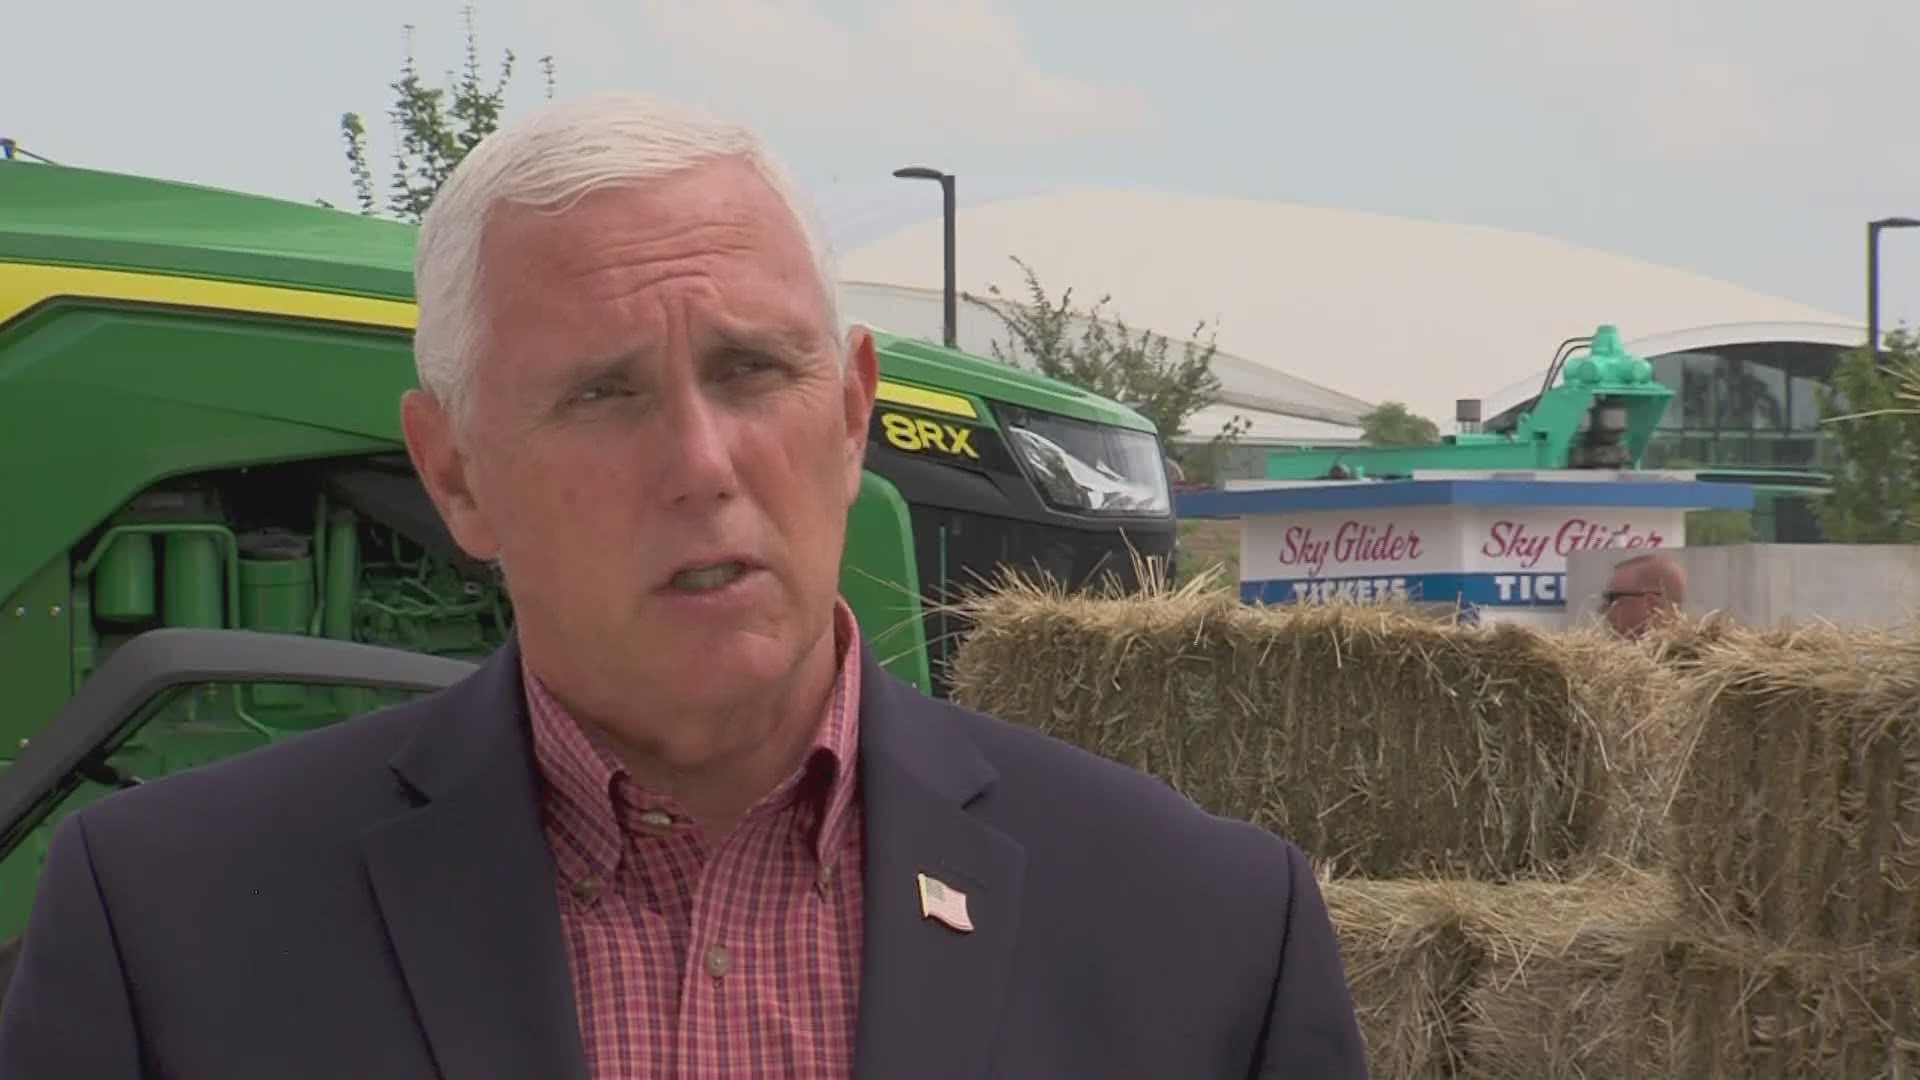 VP Mike Pence spoke with Local 5's Rachel Droze on how the federal government will help in efforts to rebuild following destructive storms earlier this week in Iowa.